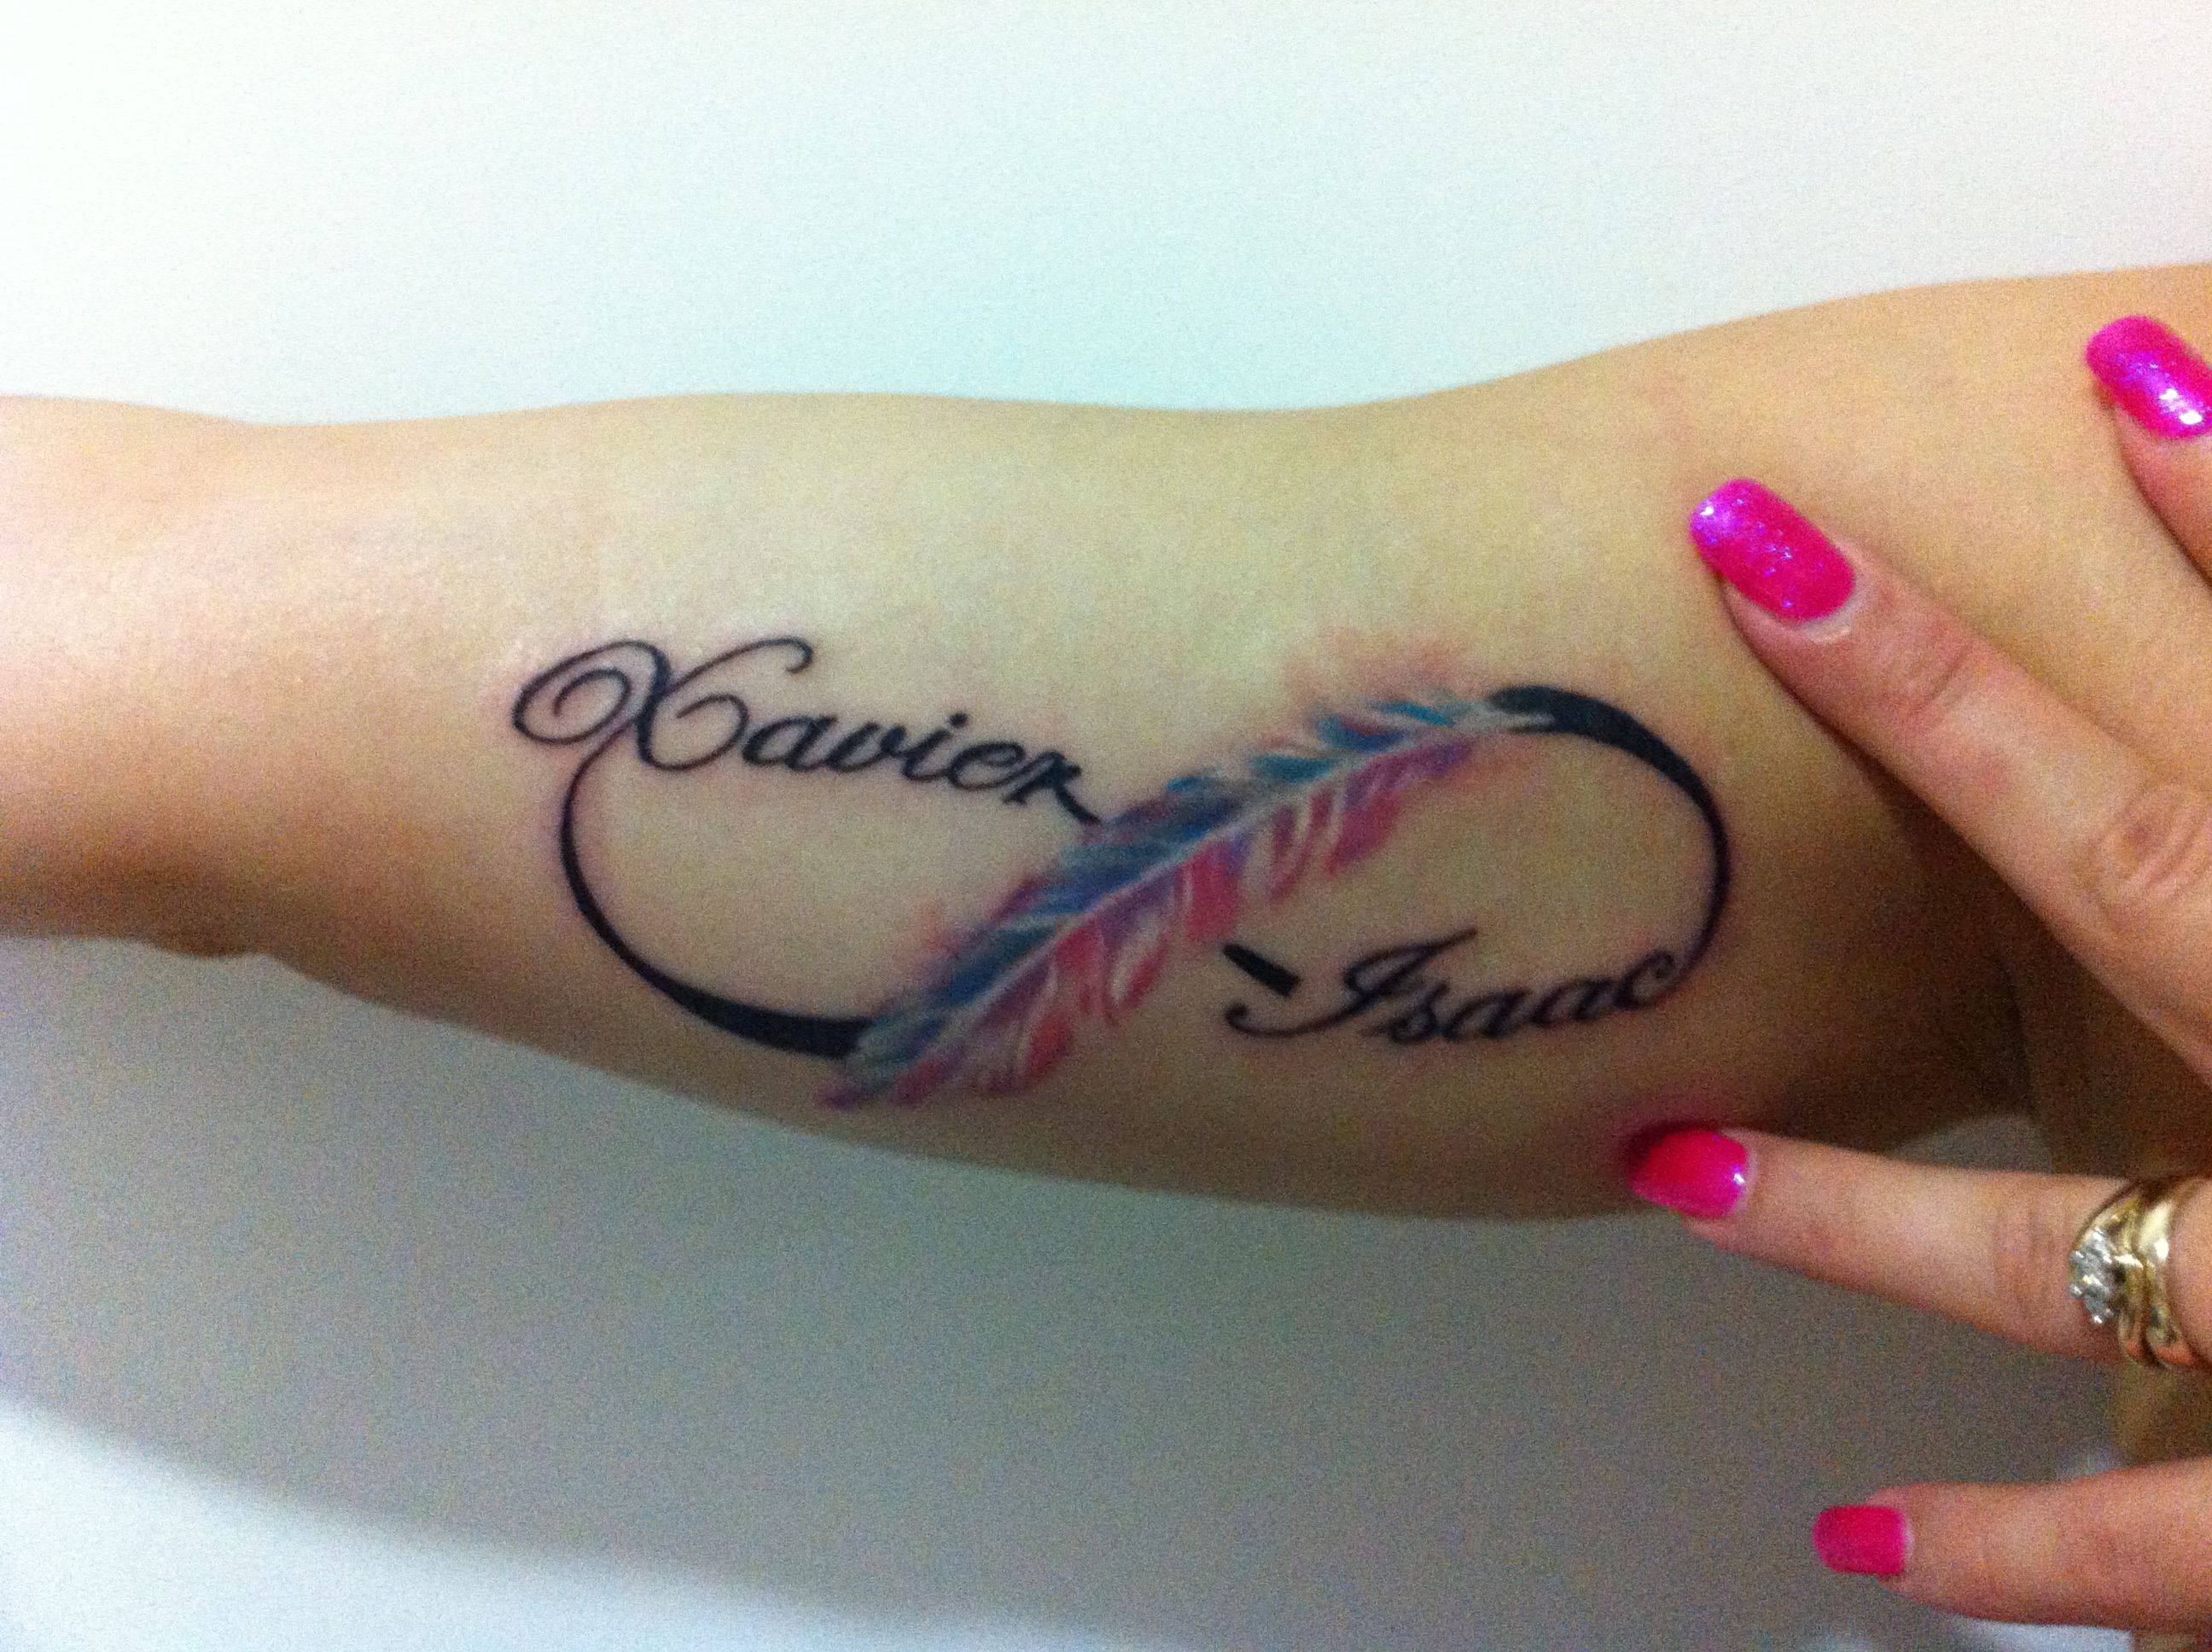 3. "Keep Going" infinity symbol tattoo - wide 4